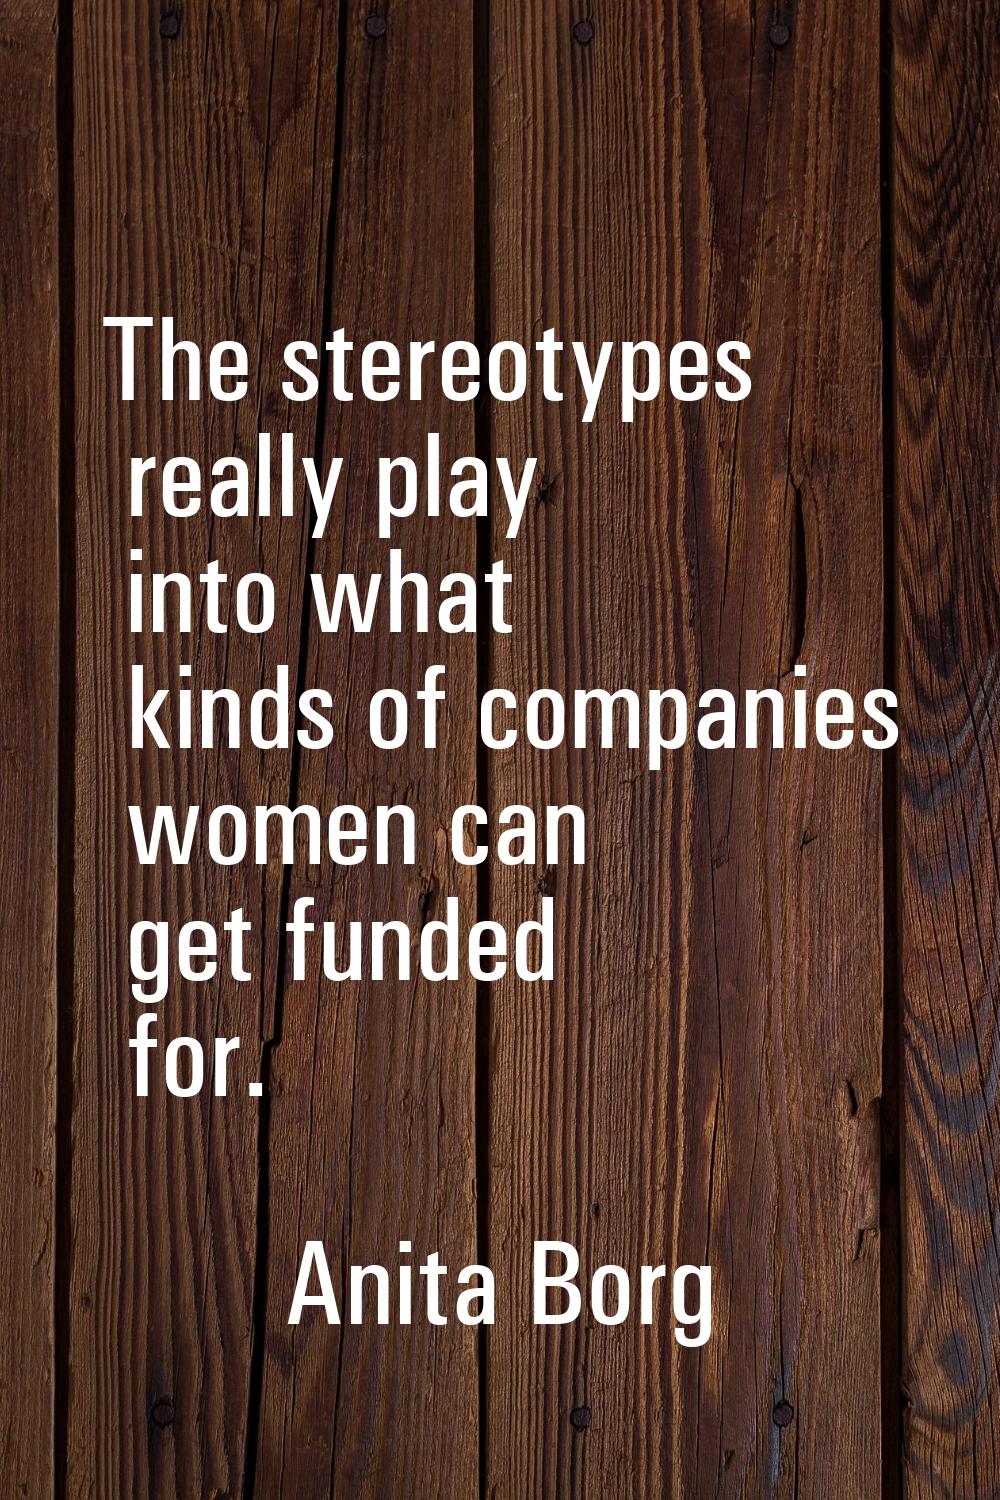 The stereotypes really play into what kinds of companies women can get funded for.